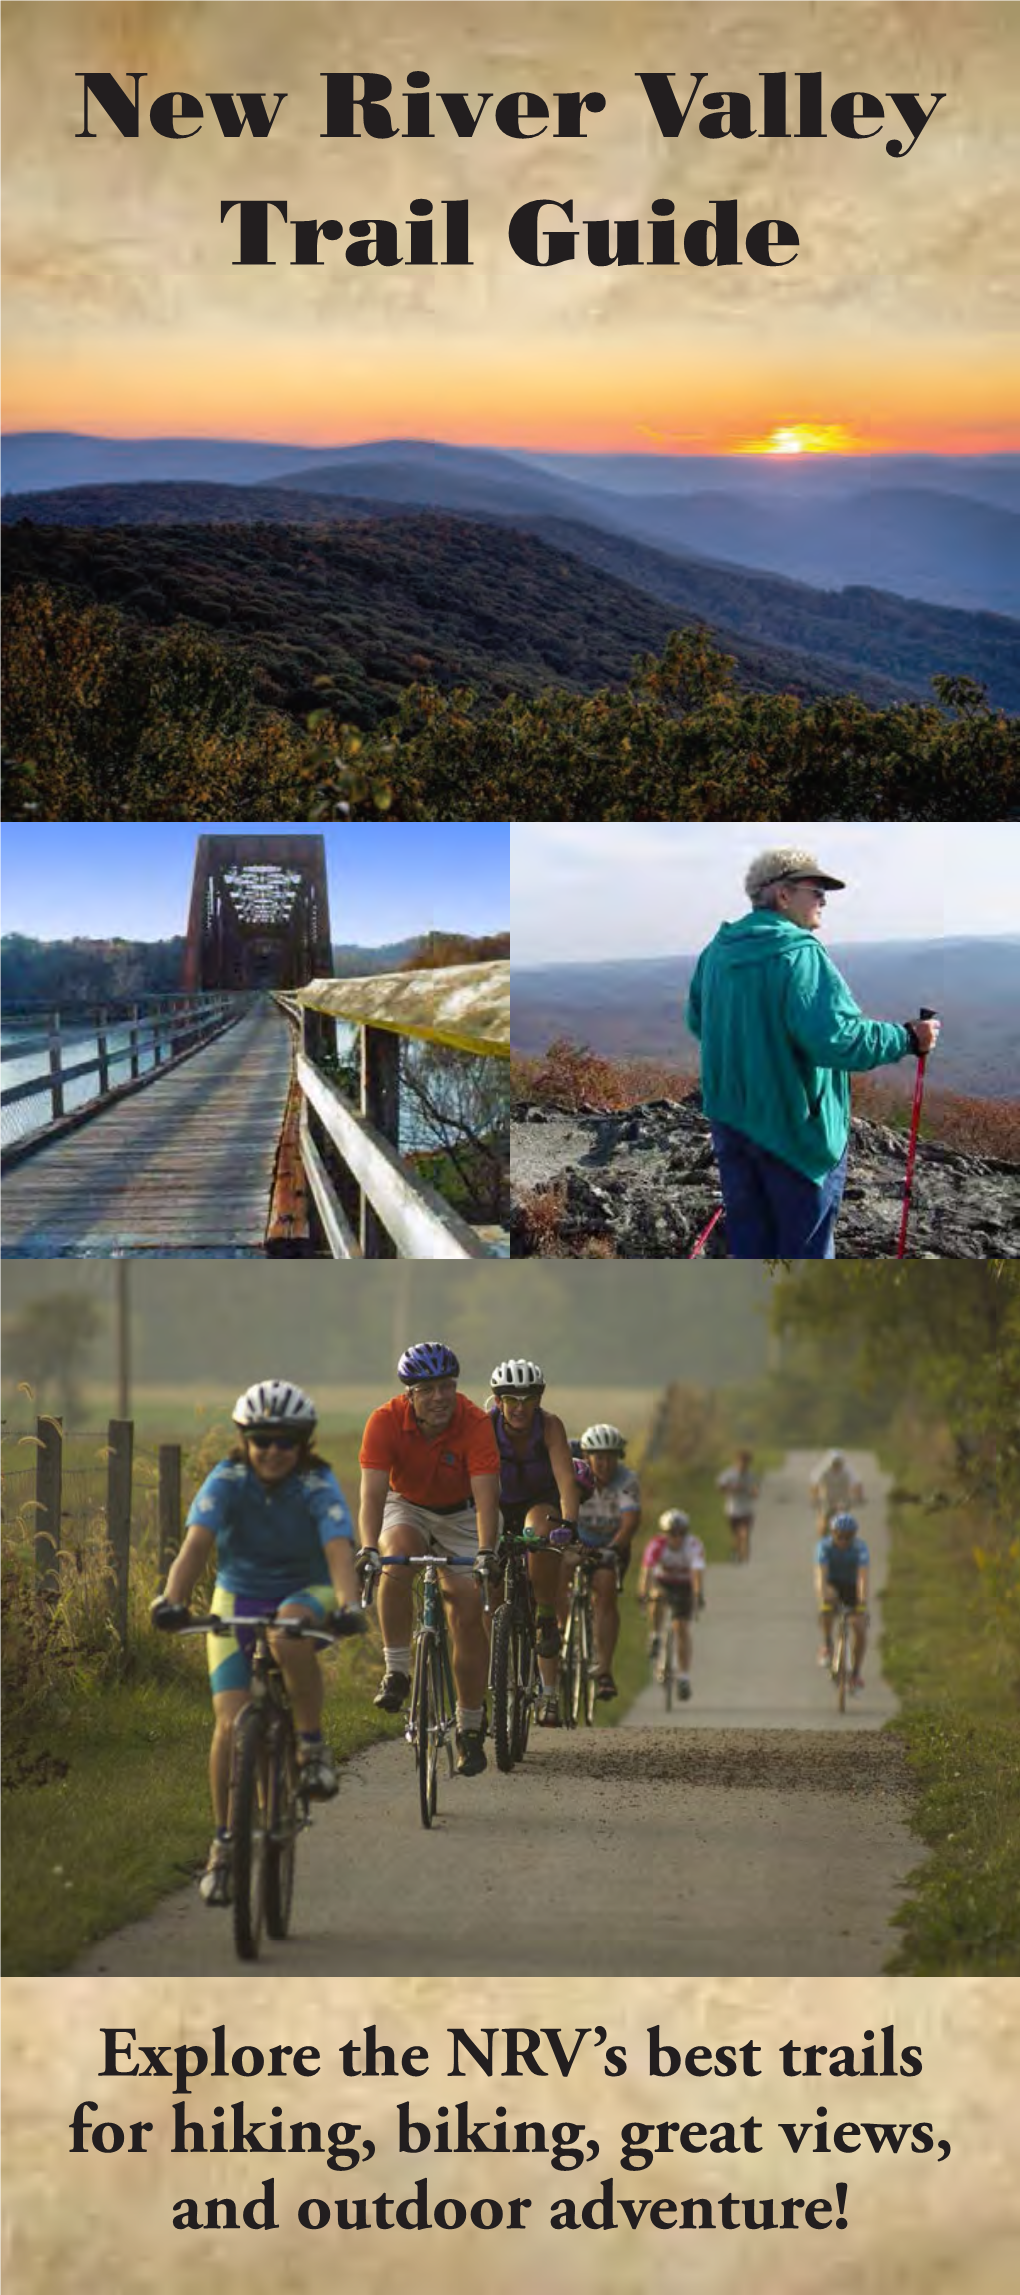 New River Valley Trail Guide